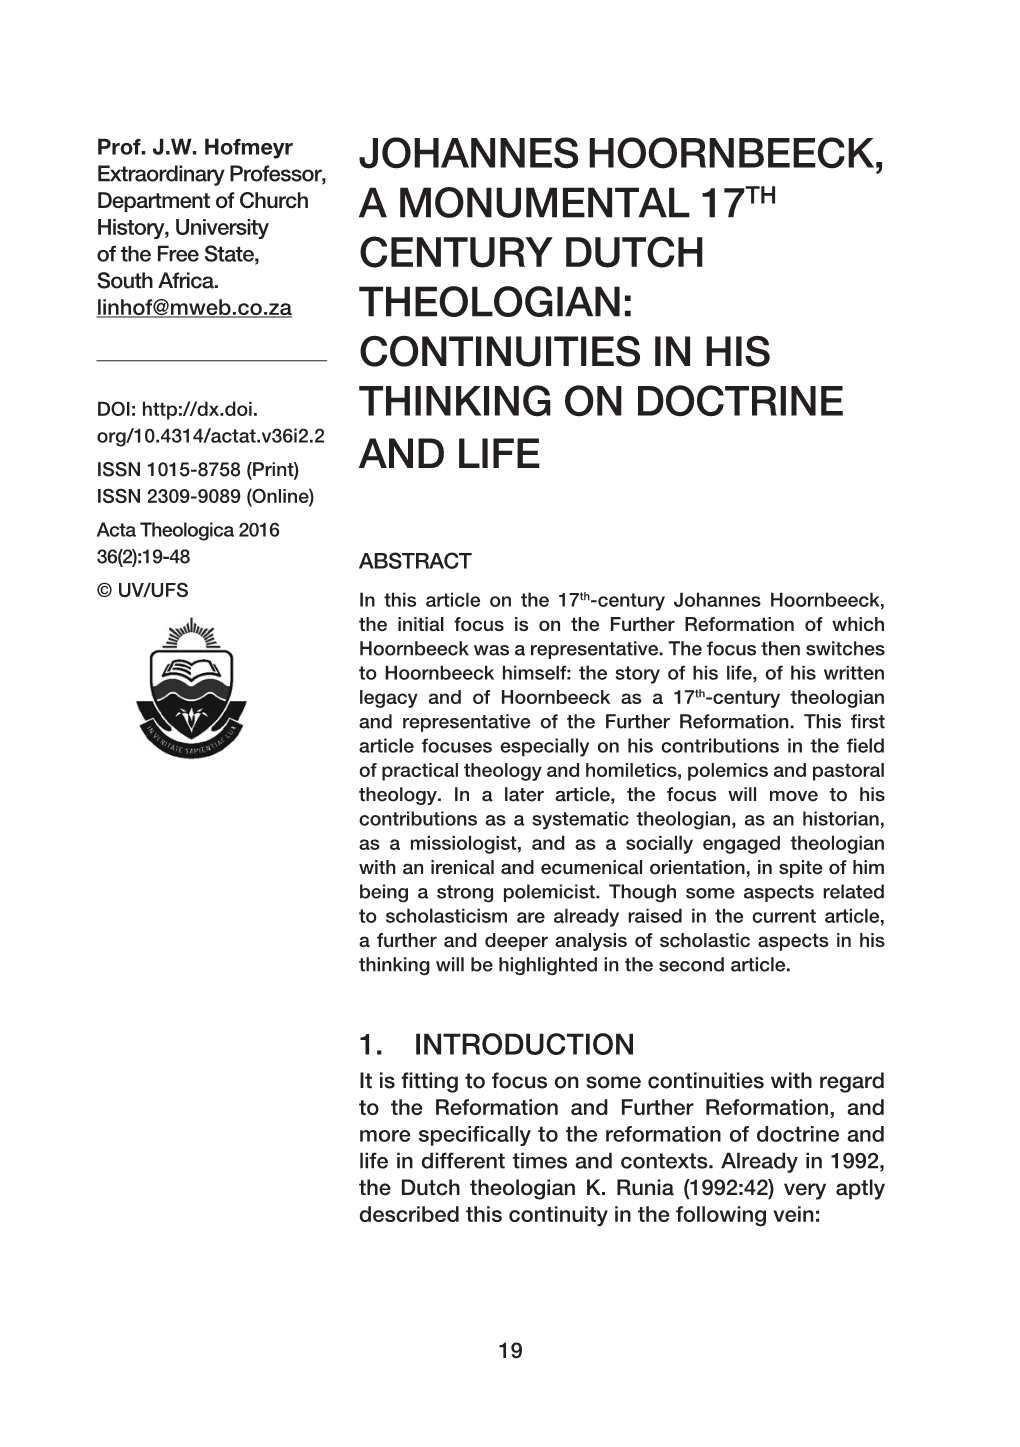 Johannes Hoornbeeck, a Monumental 17Th Century Dutch Theologian: Continuities in His Thinking on Doctrine and Life